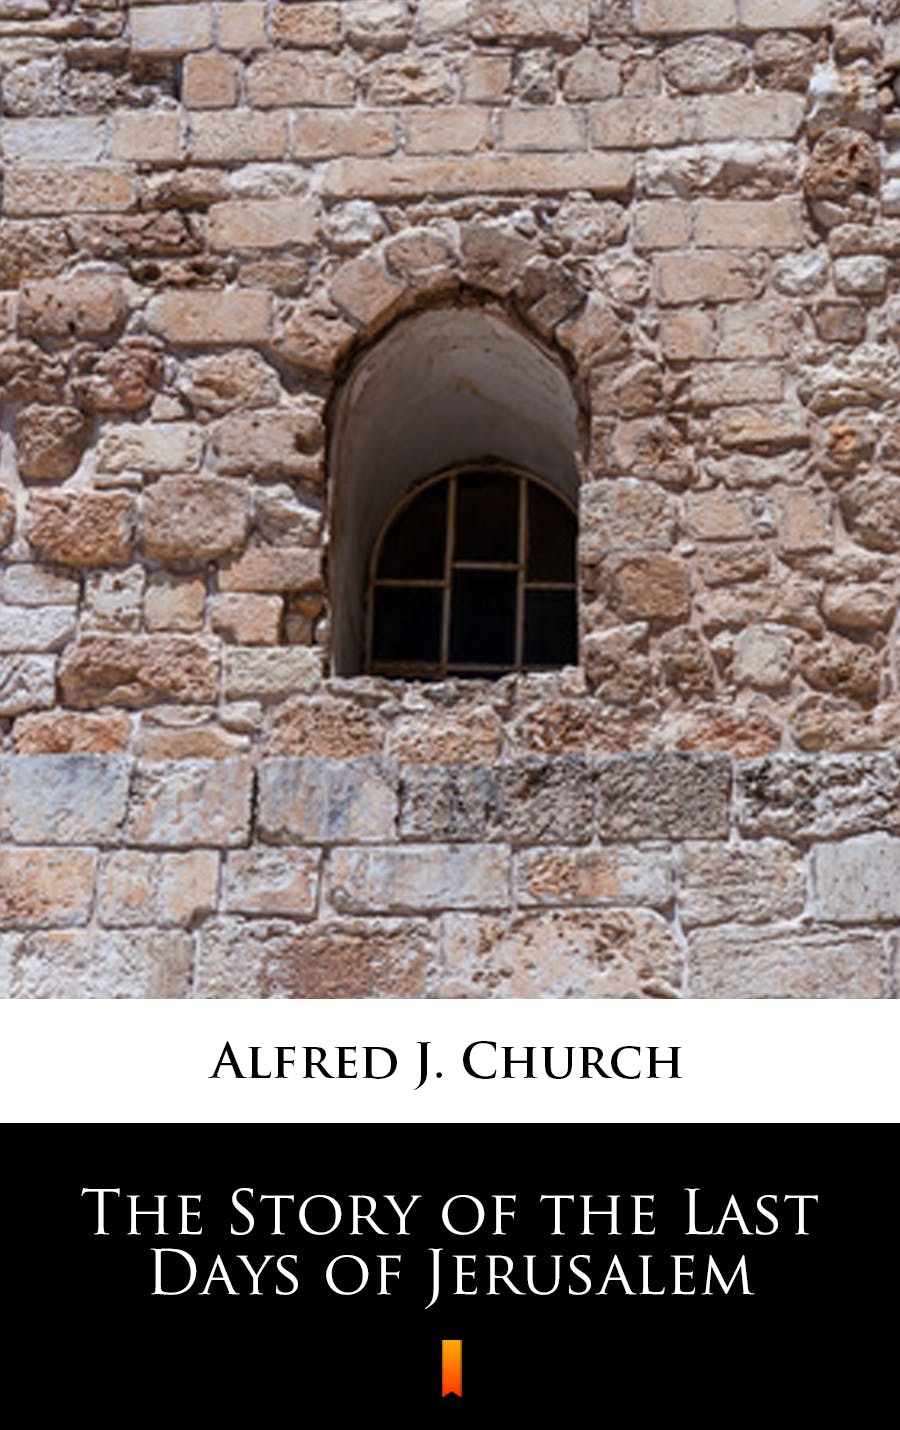 The Story of the Last Days of Jerusalem - Alfred J. Church